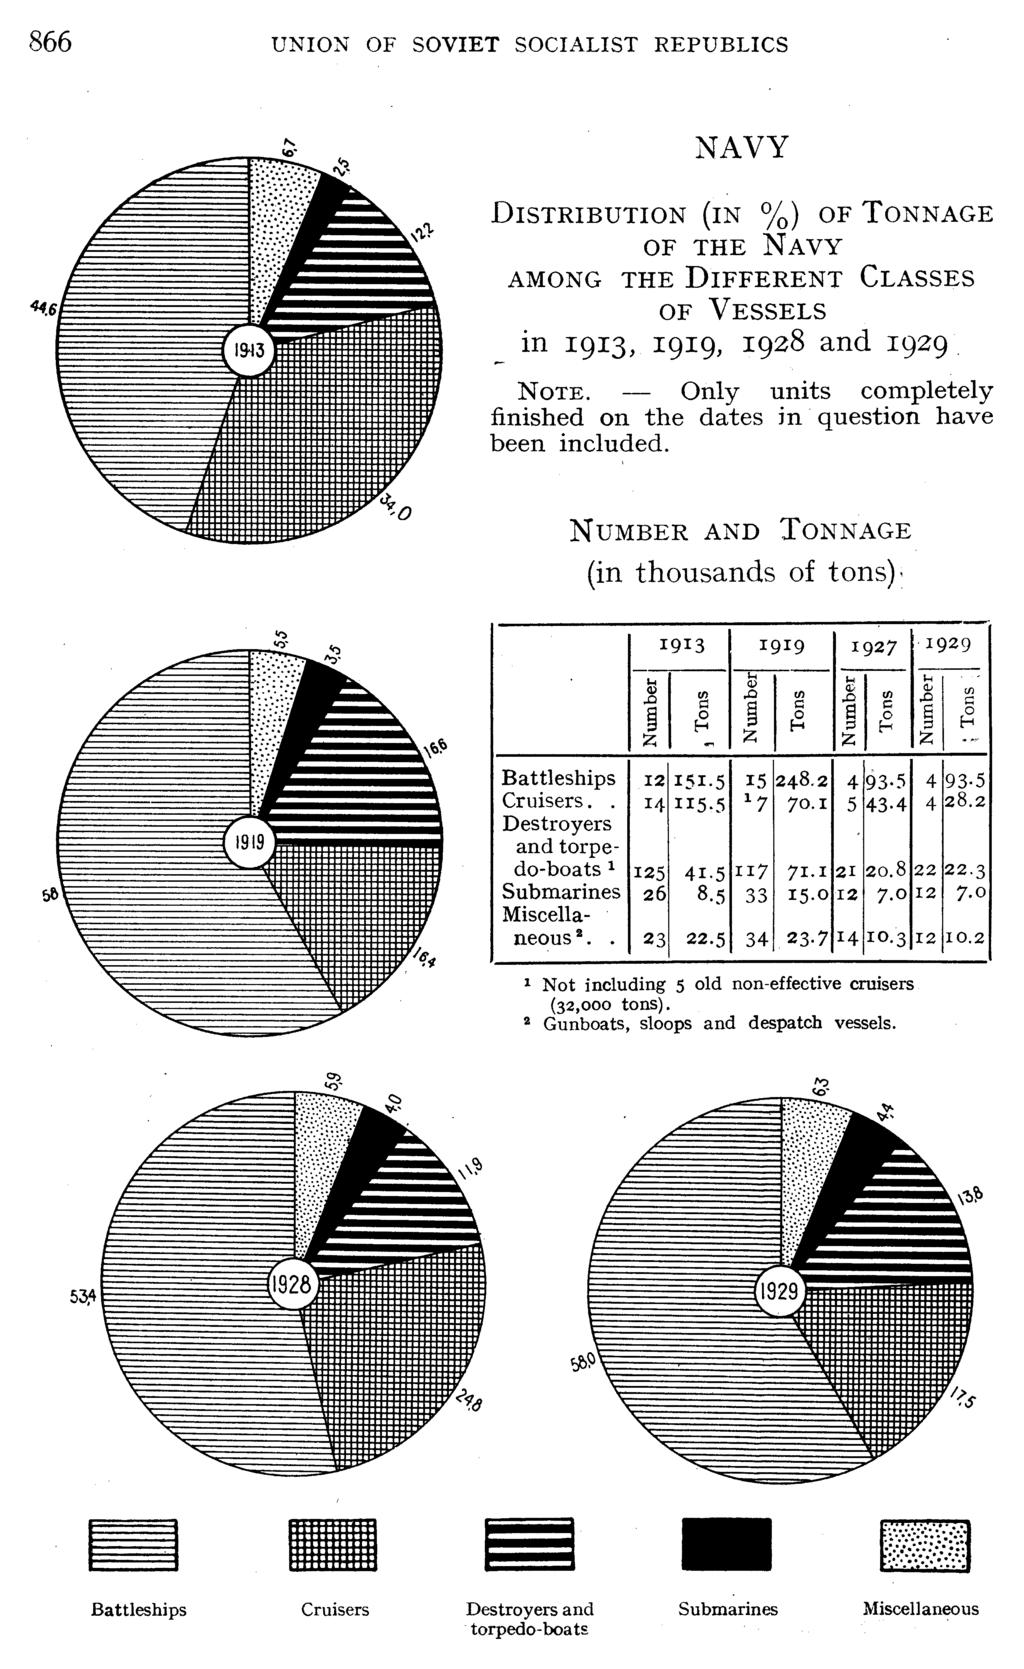 866 UNION OF SOVIET SOCIALIST REPUBLICS [?'~ NAVY ~DISTRIBUTION (IN %) OF TONNAGE OF THE NAVY AMONG THE DIFFERENT CLASSES 41~.~~~6 ~ ~OF VESSELS IS(~3 ~ in 1913, I919, 1928 and 1929 NOTE.